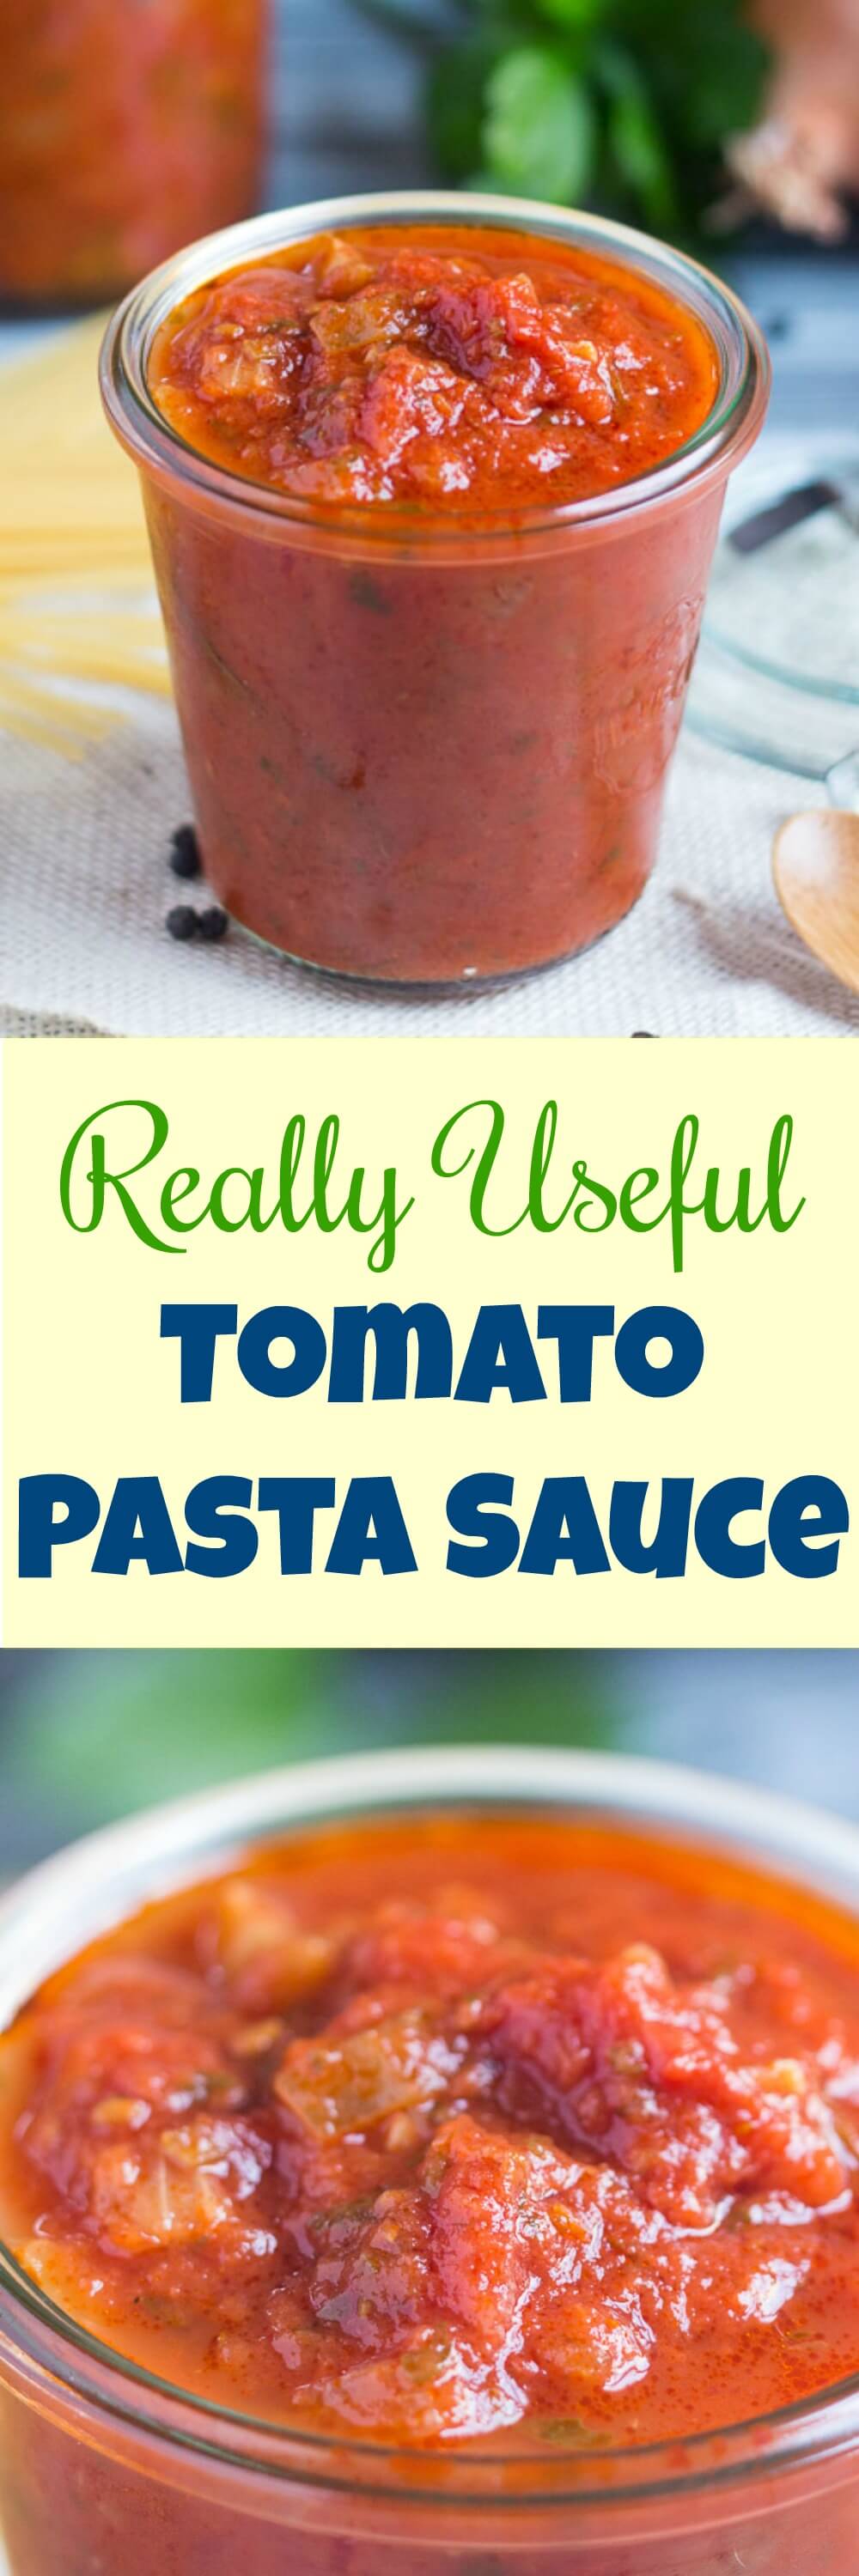 how to make pasta sauce with tomato sauce